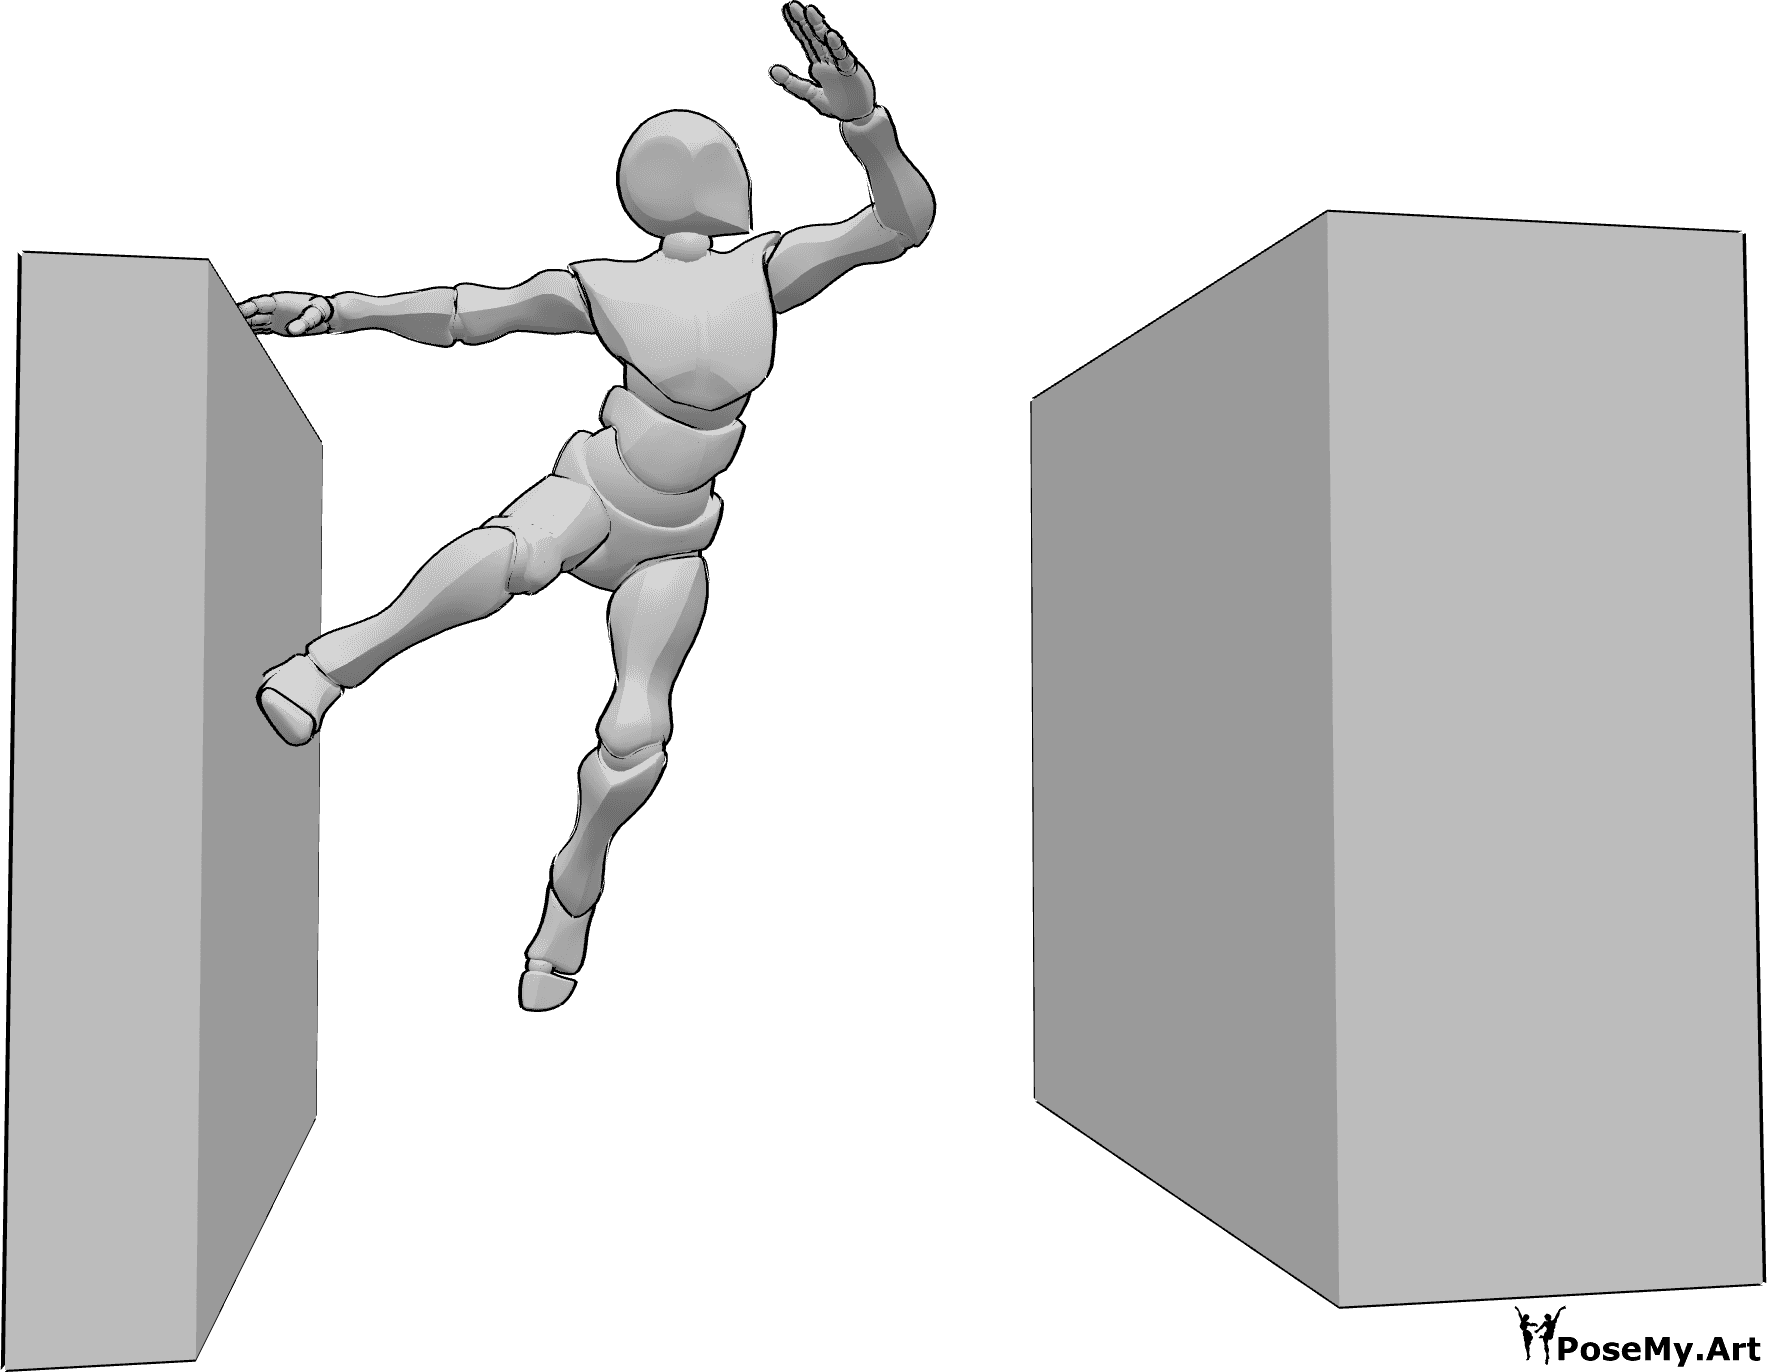 Pose Reference- Parkour jumping walls pose - Male is jumping on the walls, jumping from one wall to another